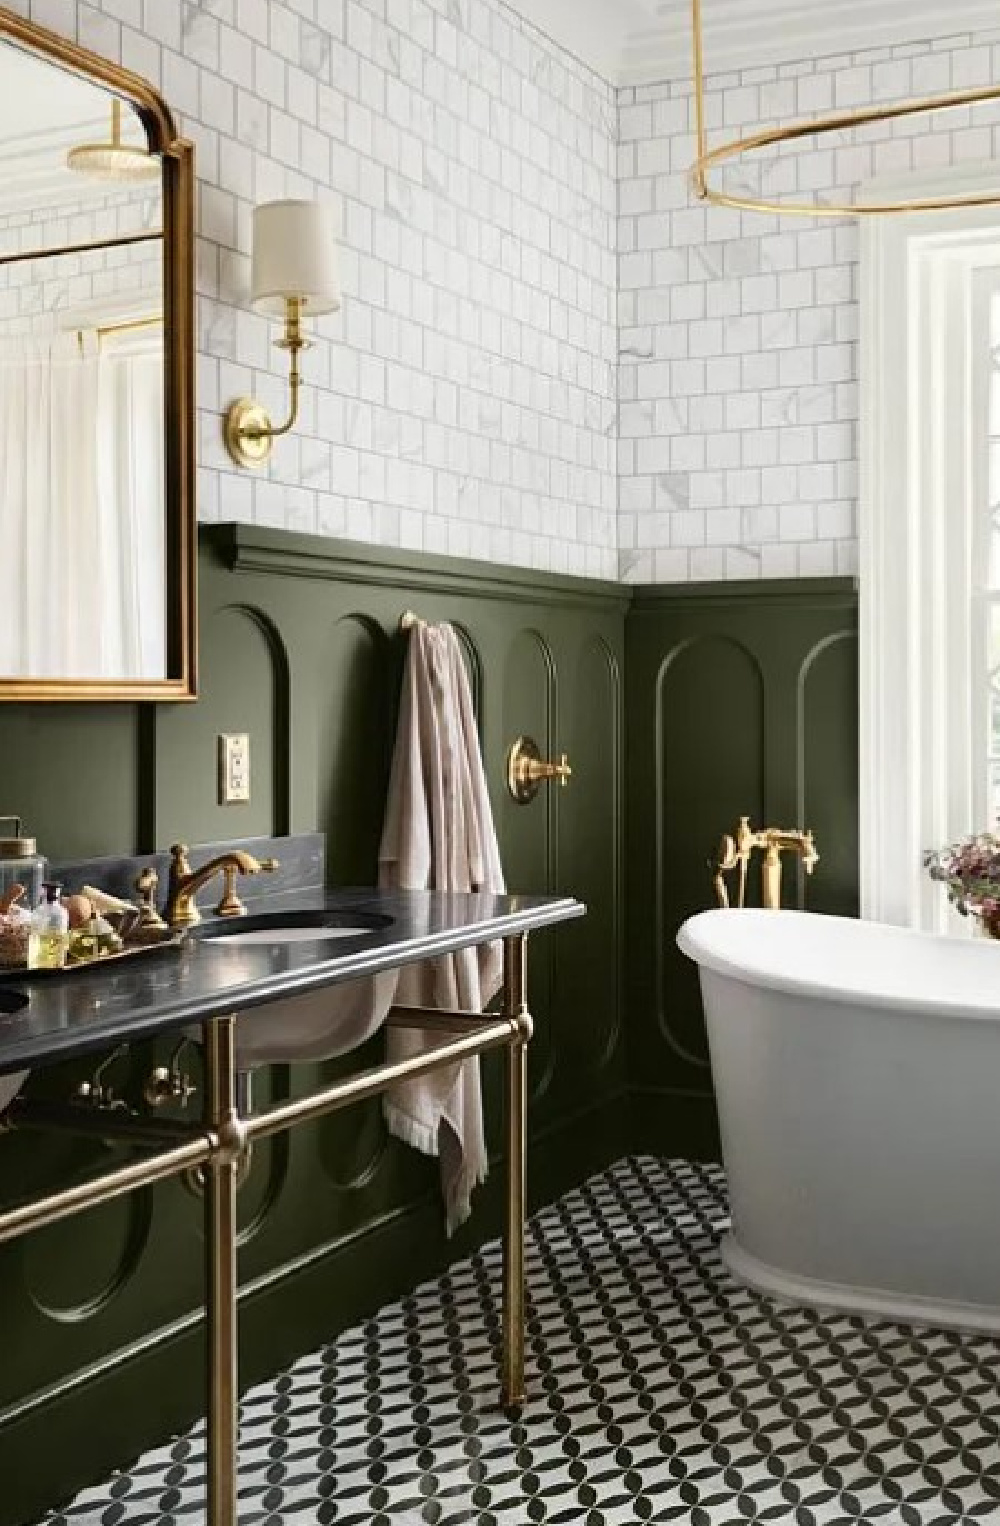 Step Stool Green (an olive green paint color by Kilz - Magnolia's Castle Collection by Joanna Gaines) on paneled walls in a bath with subway tile in Fixer Upper The Castle (Waco, TX). #thecastle #fixerupperthecastle